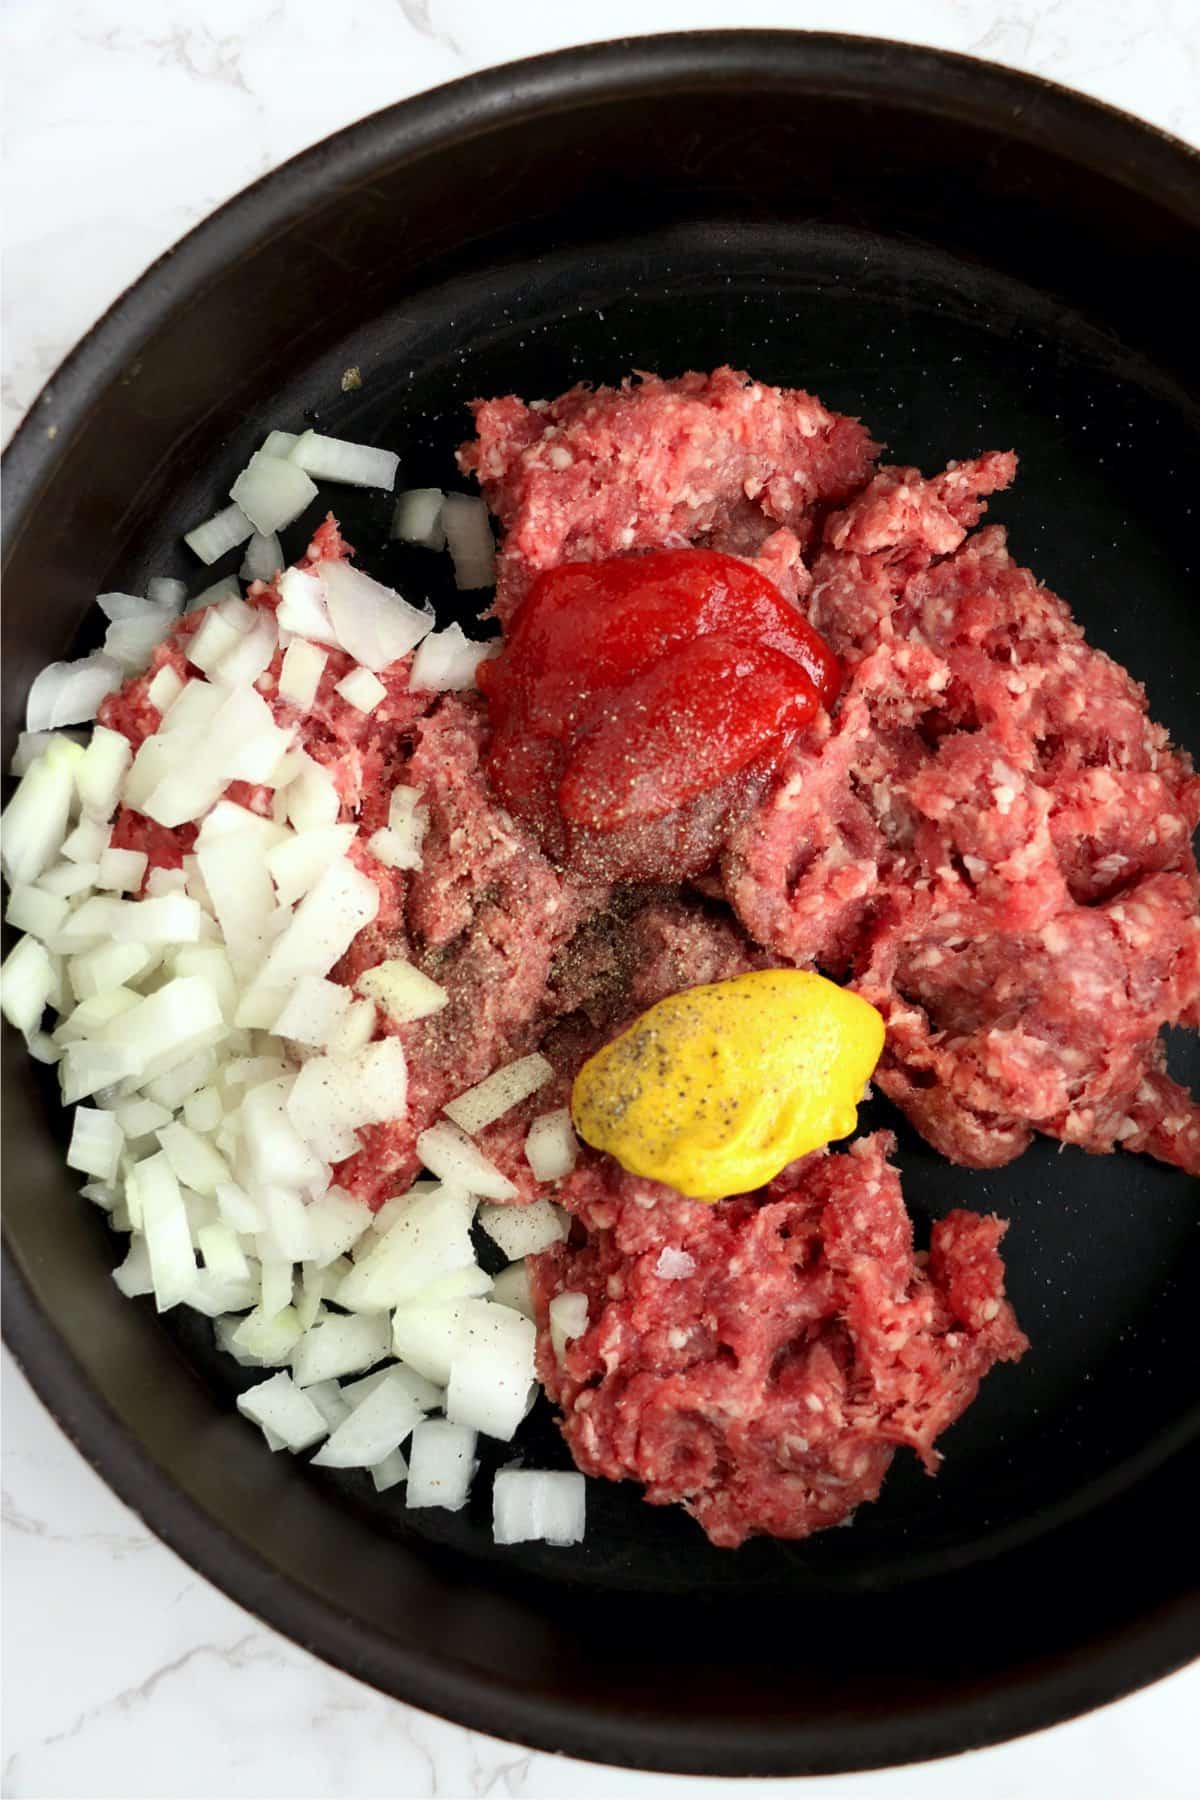 Closeup shot of beef, ketchup, mustard, and onions in skillet